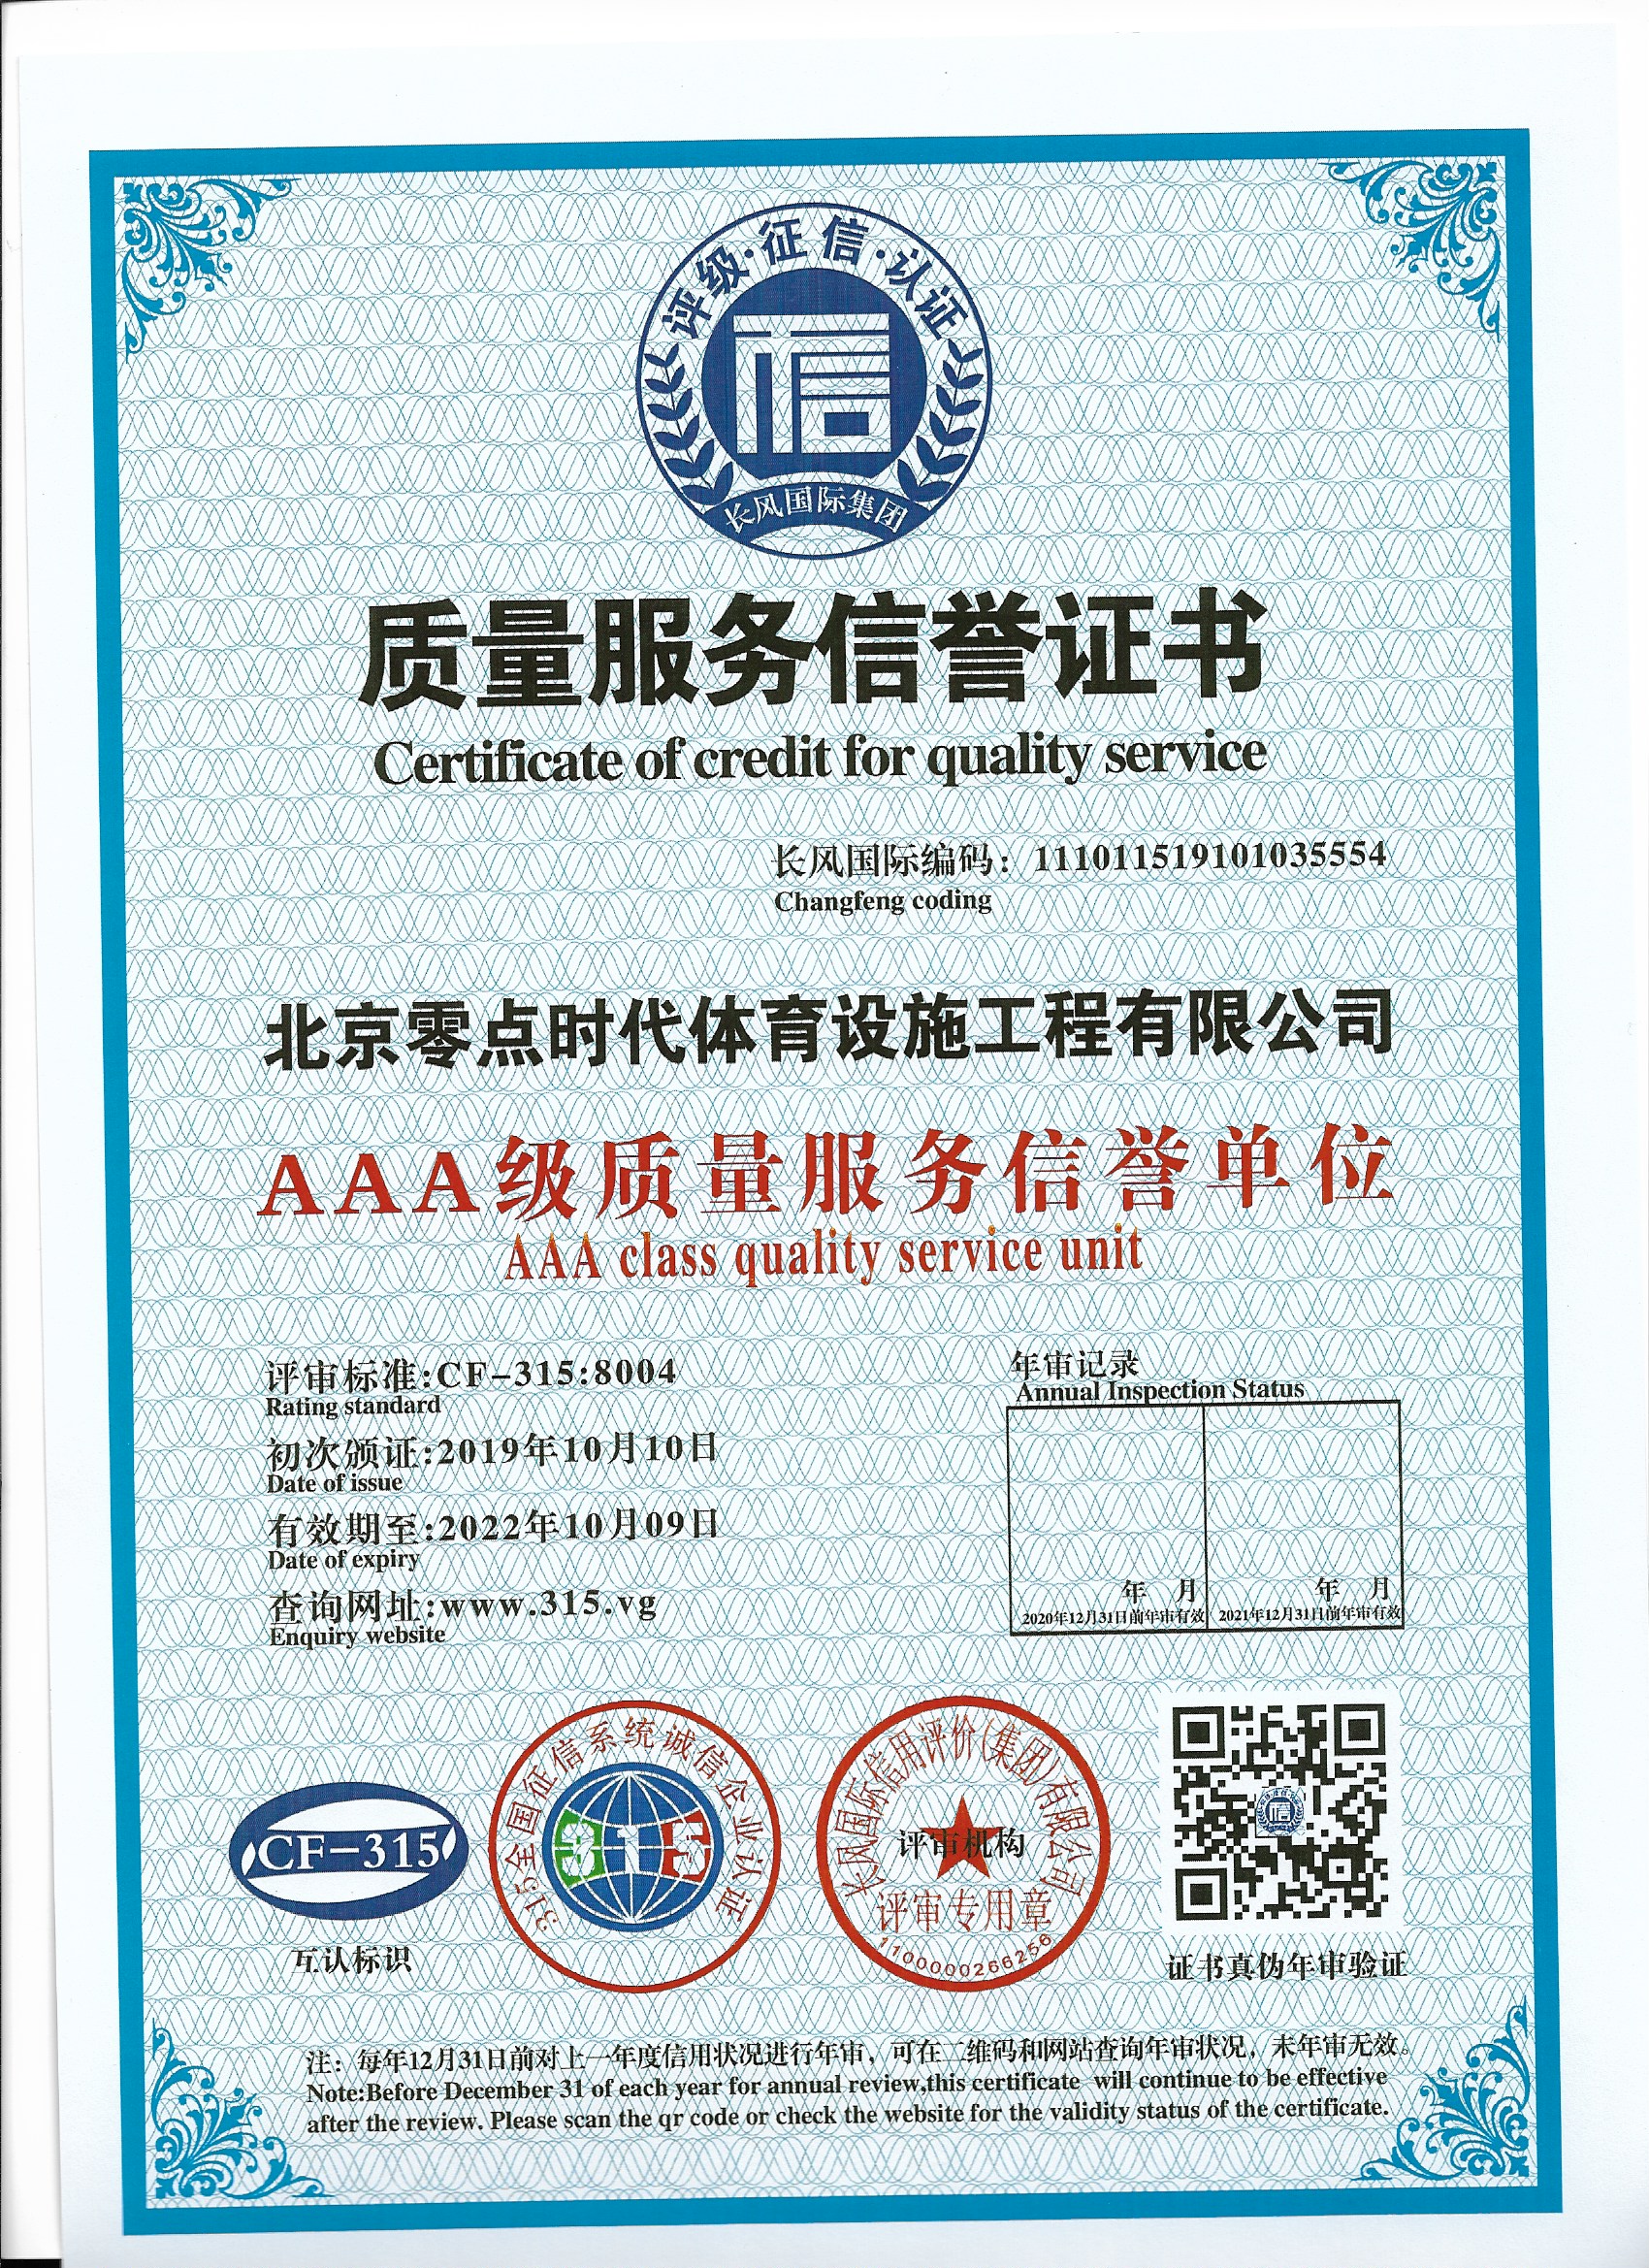 AAA-level Quality Service Reputation Certificate